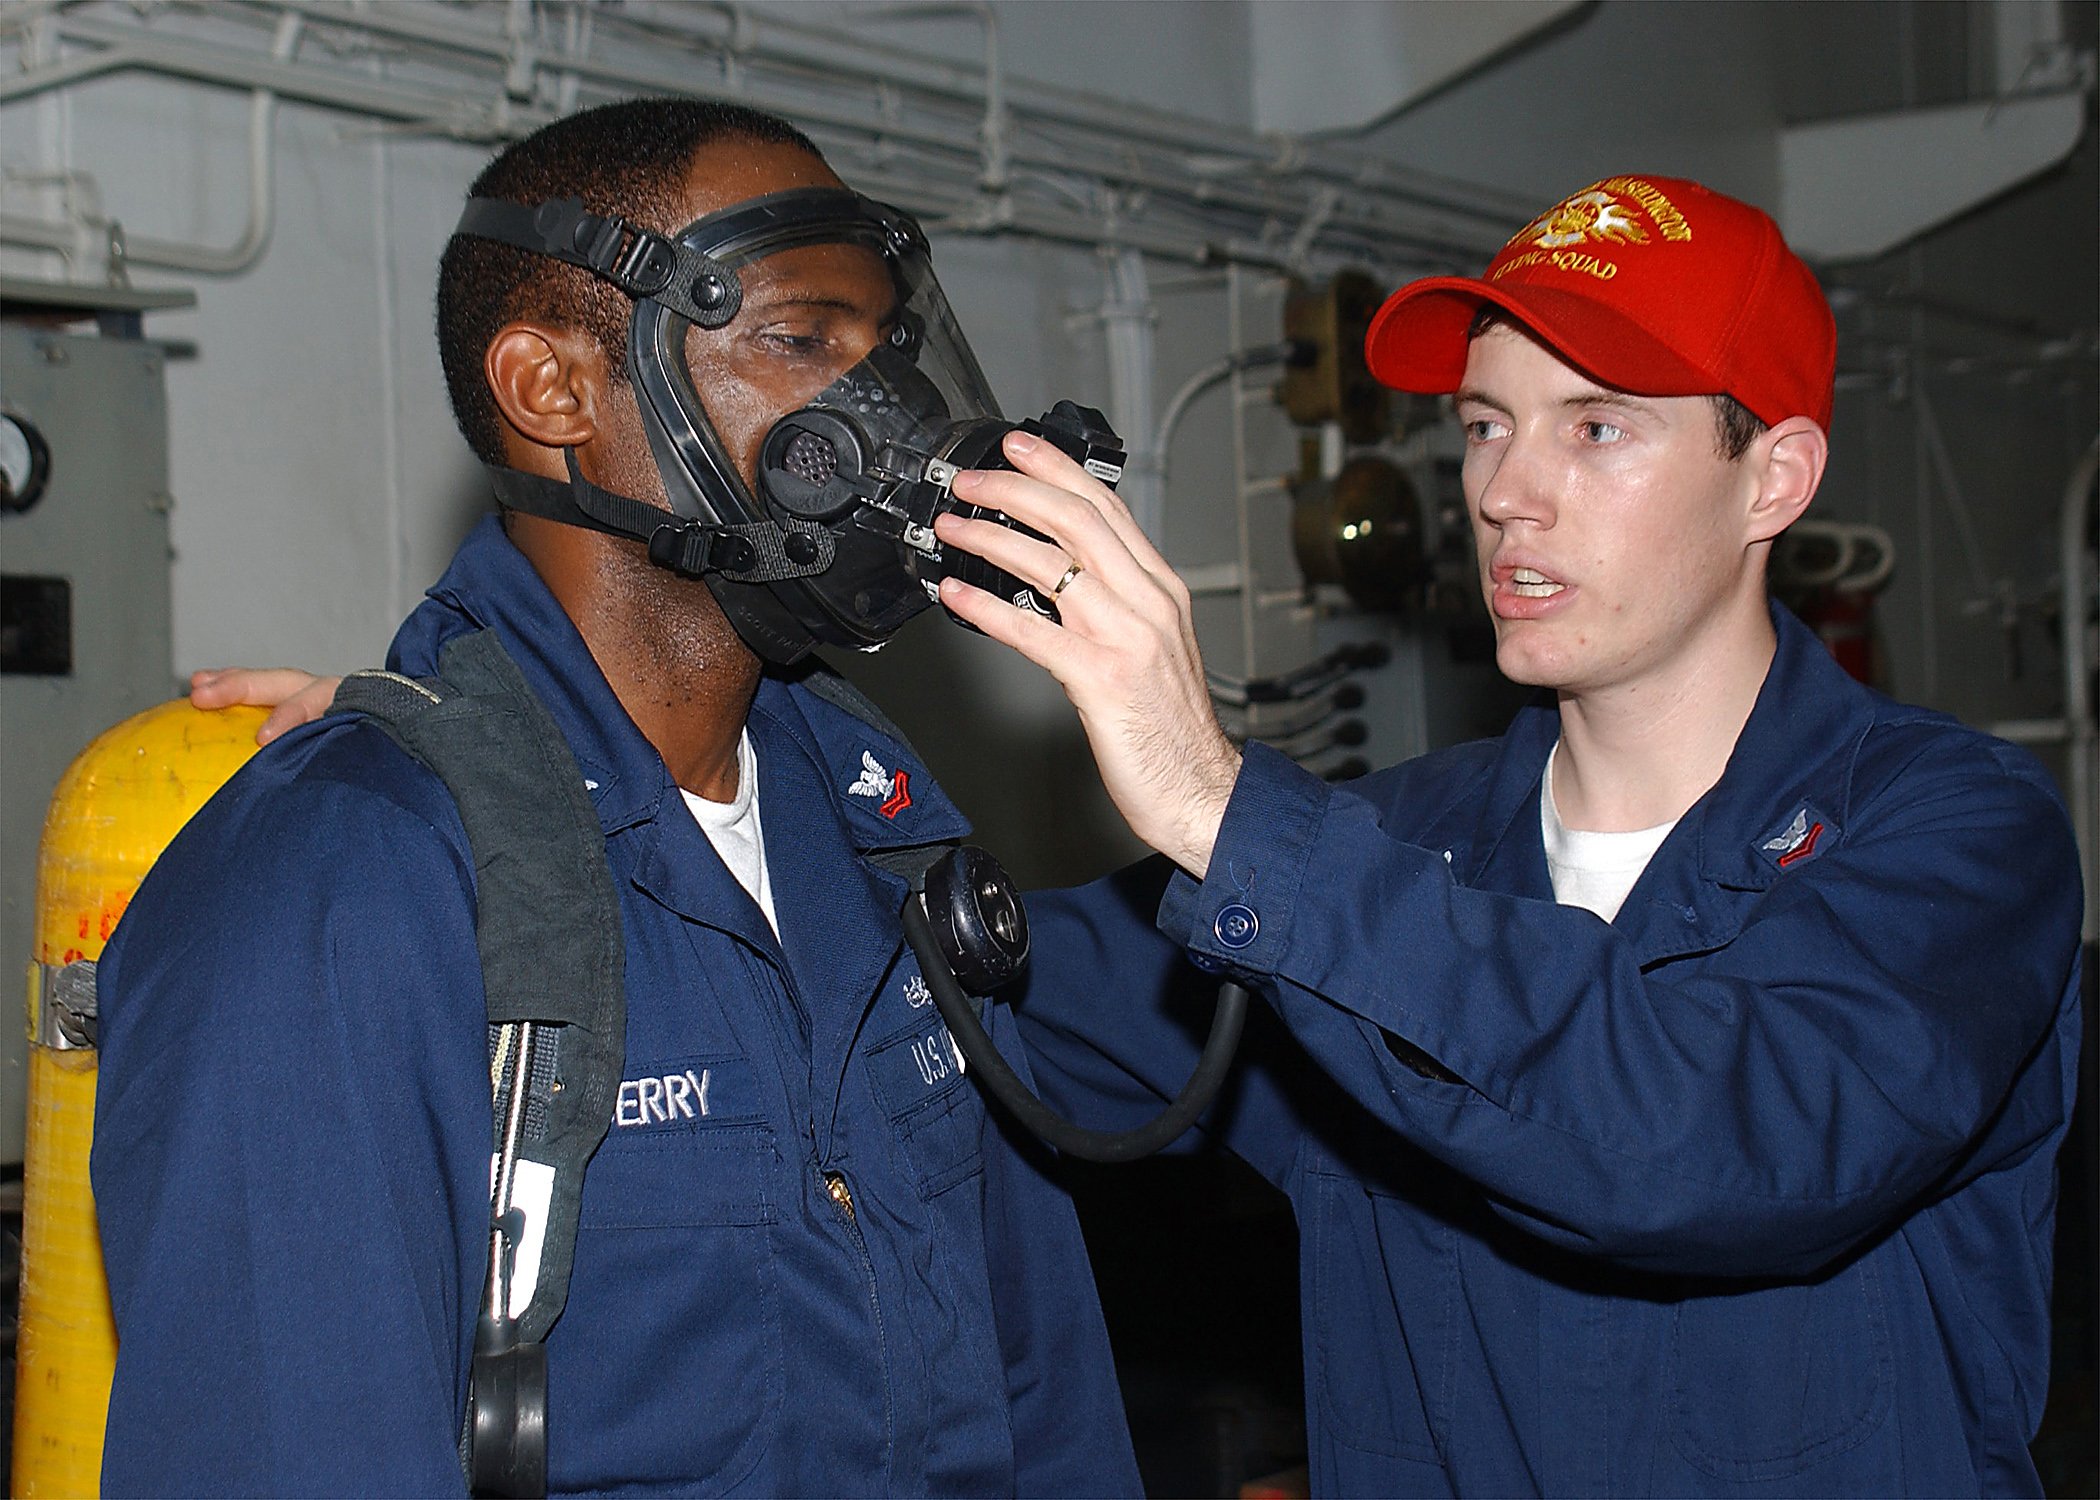 US Navy 040518-N-3992H-007 Damage Controlman 2nd Class Dustin Woolever of Lancaster, Ohio, demonstrates the proper wear and use of the Self Contained Breathing Apparatus (SCBA)